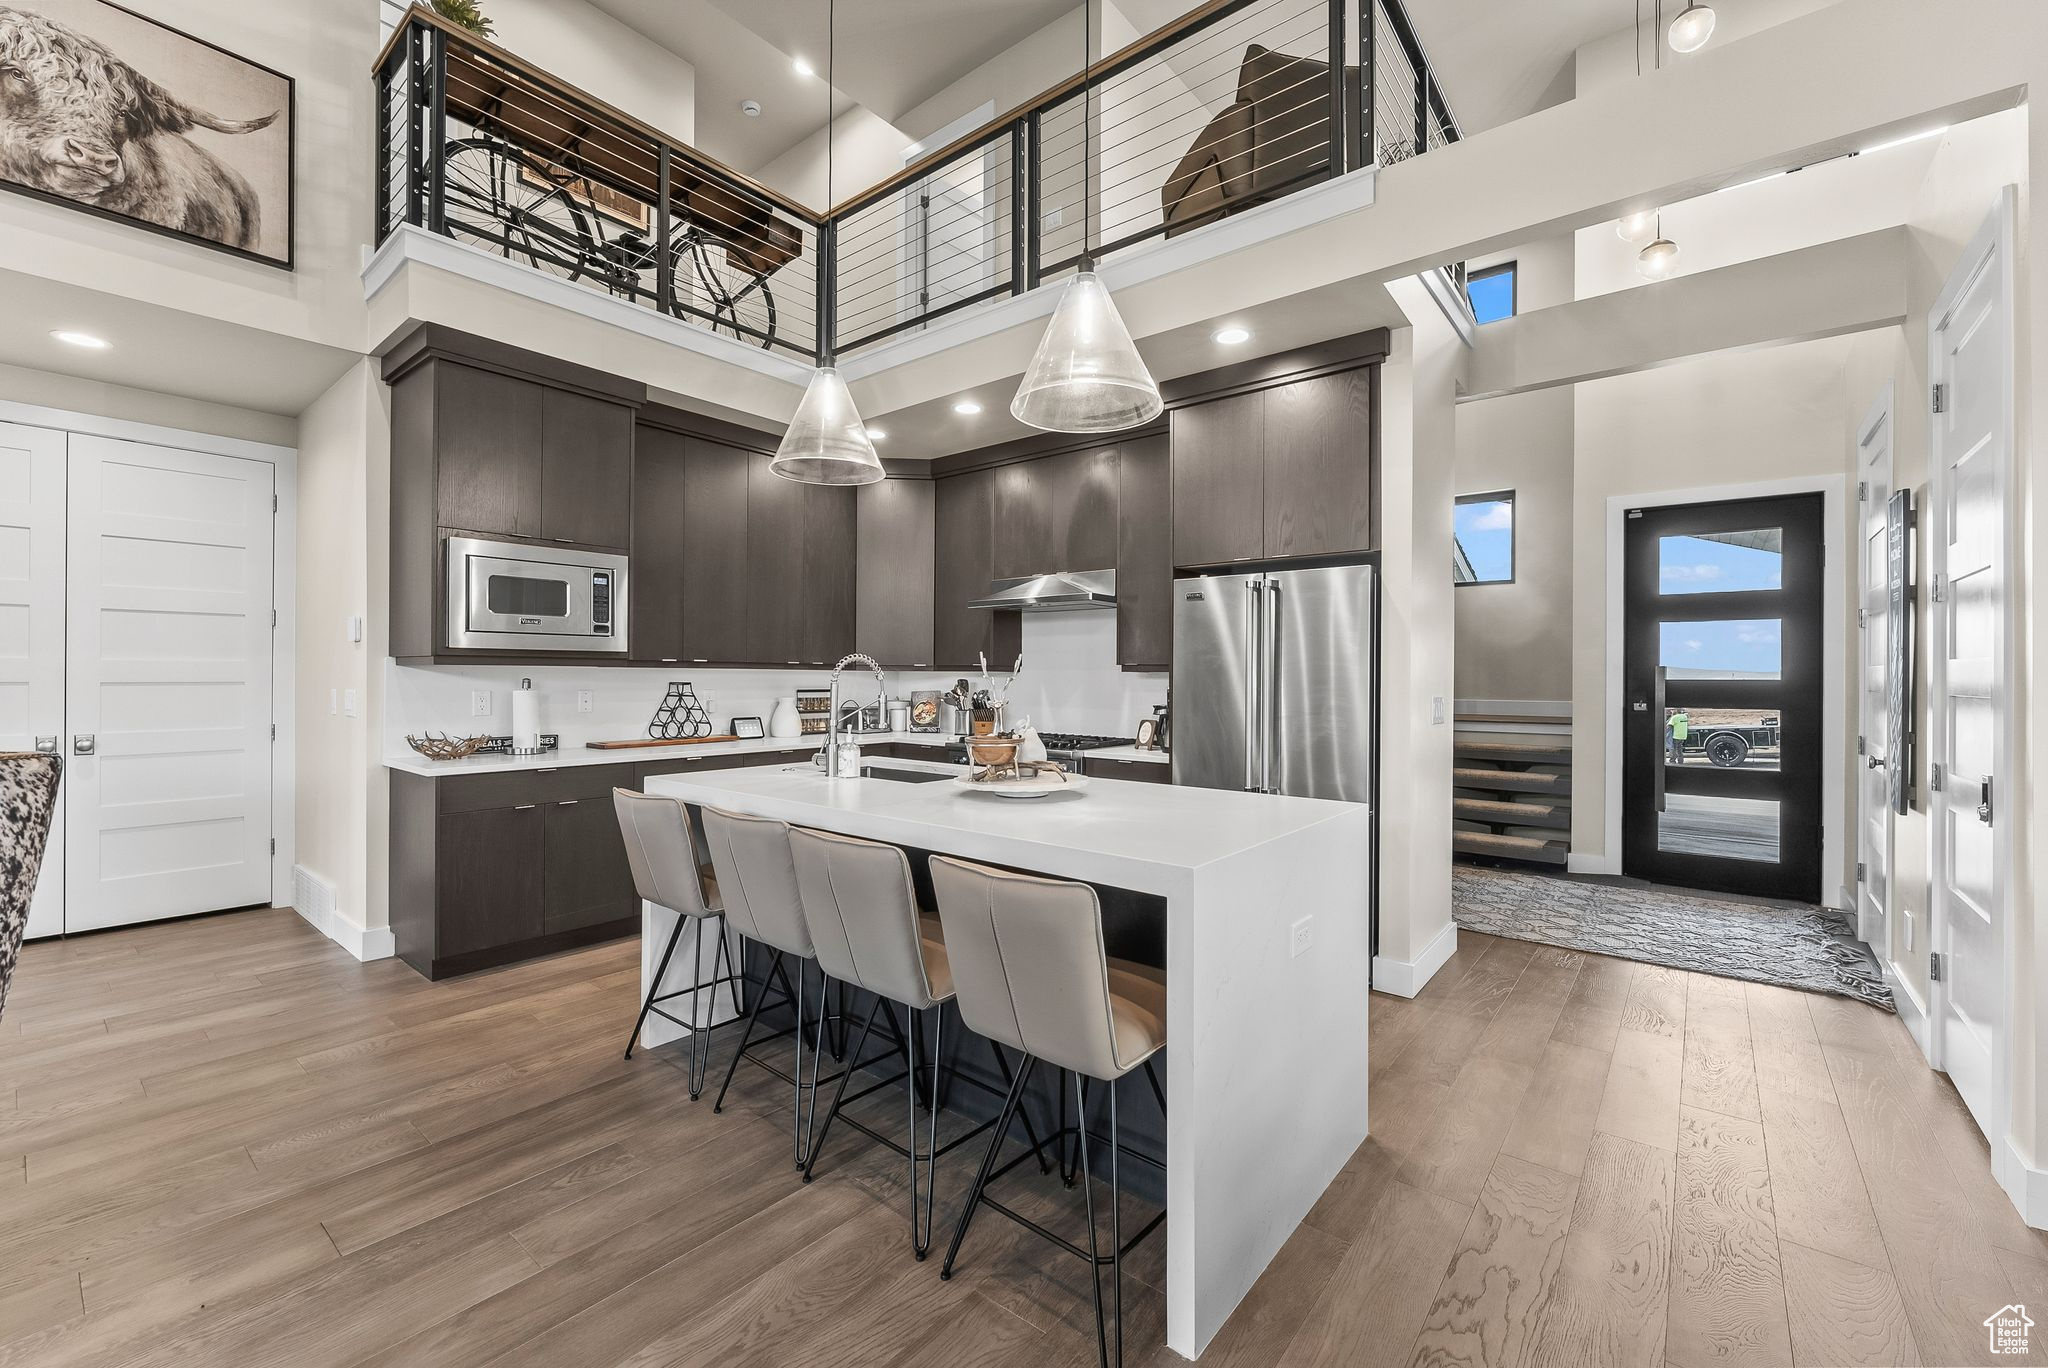 Kitchen with stainless steel appliances, a towering ceiling, light wood-type flooring, and a kitchen island with sink